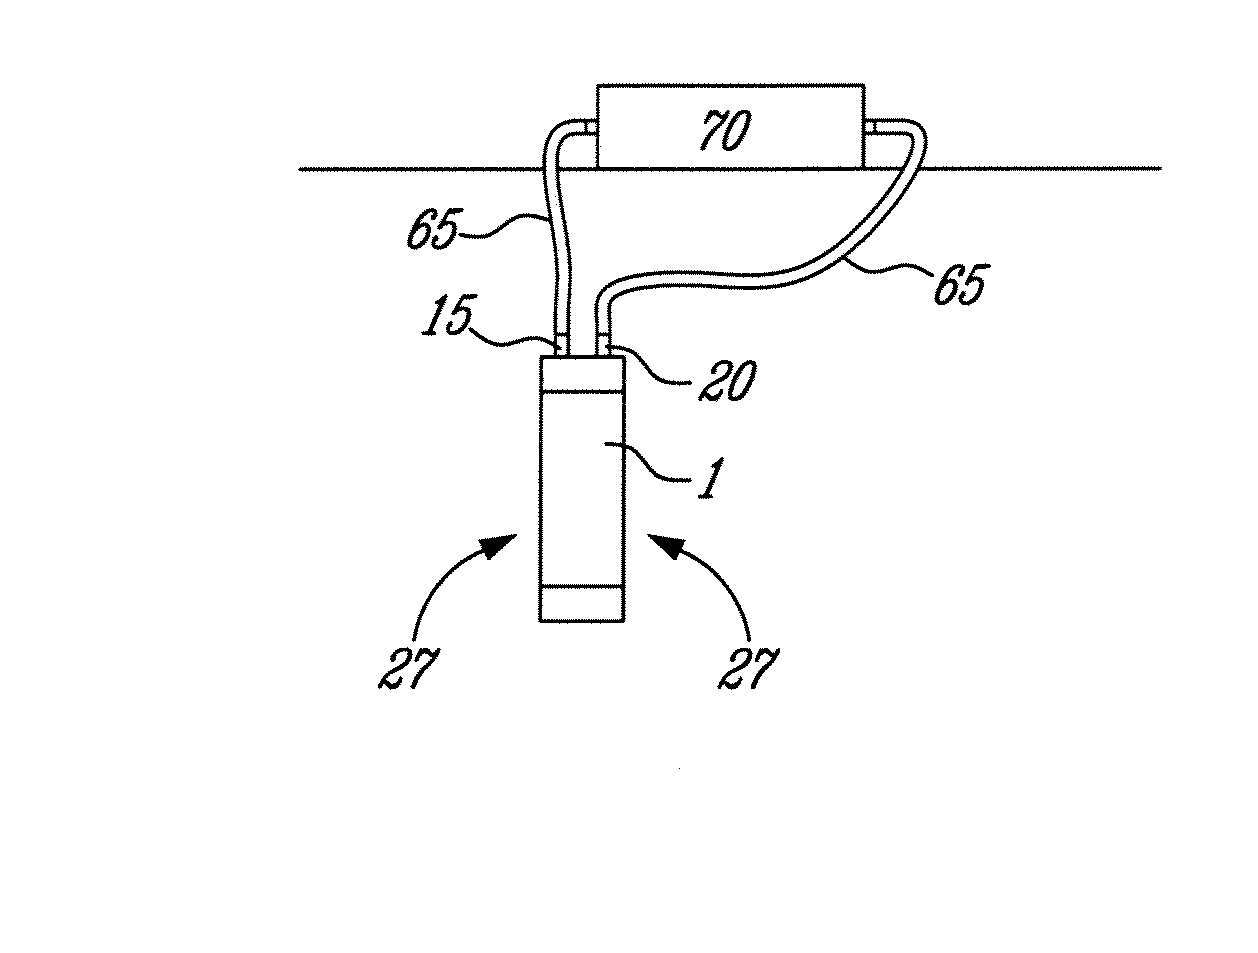 Apparatus and method for measuring soil gases